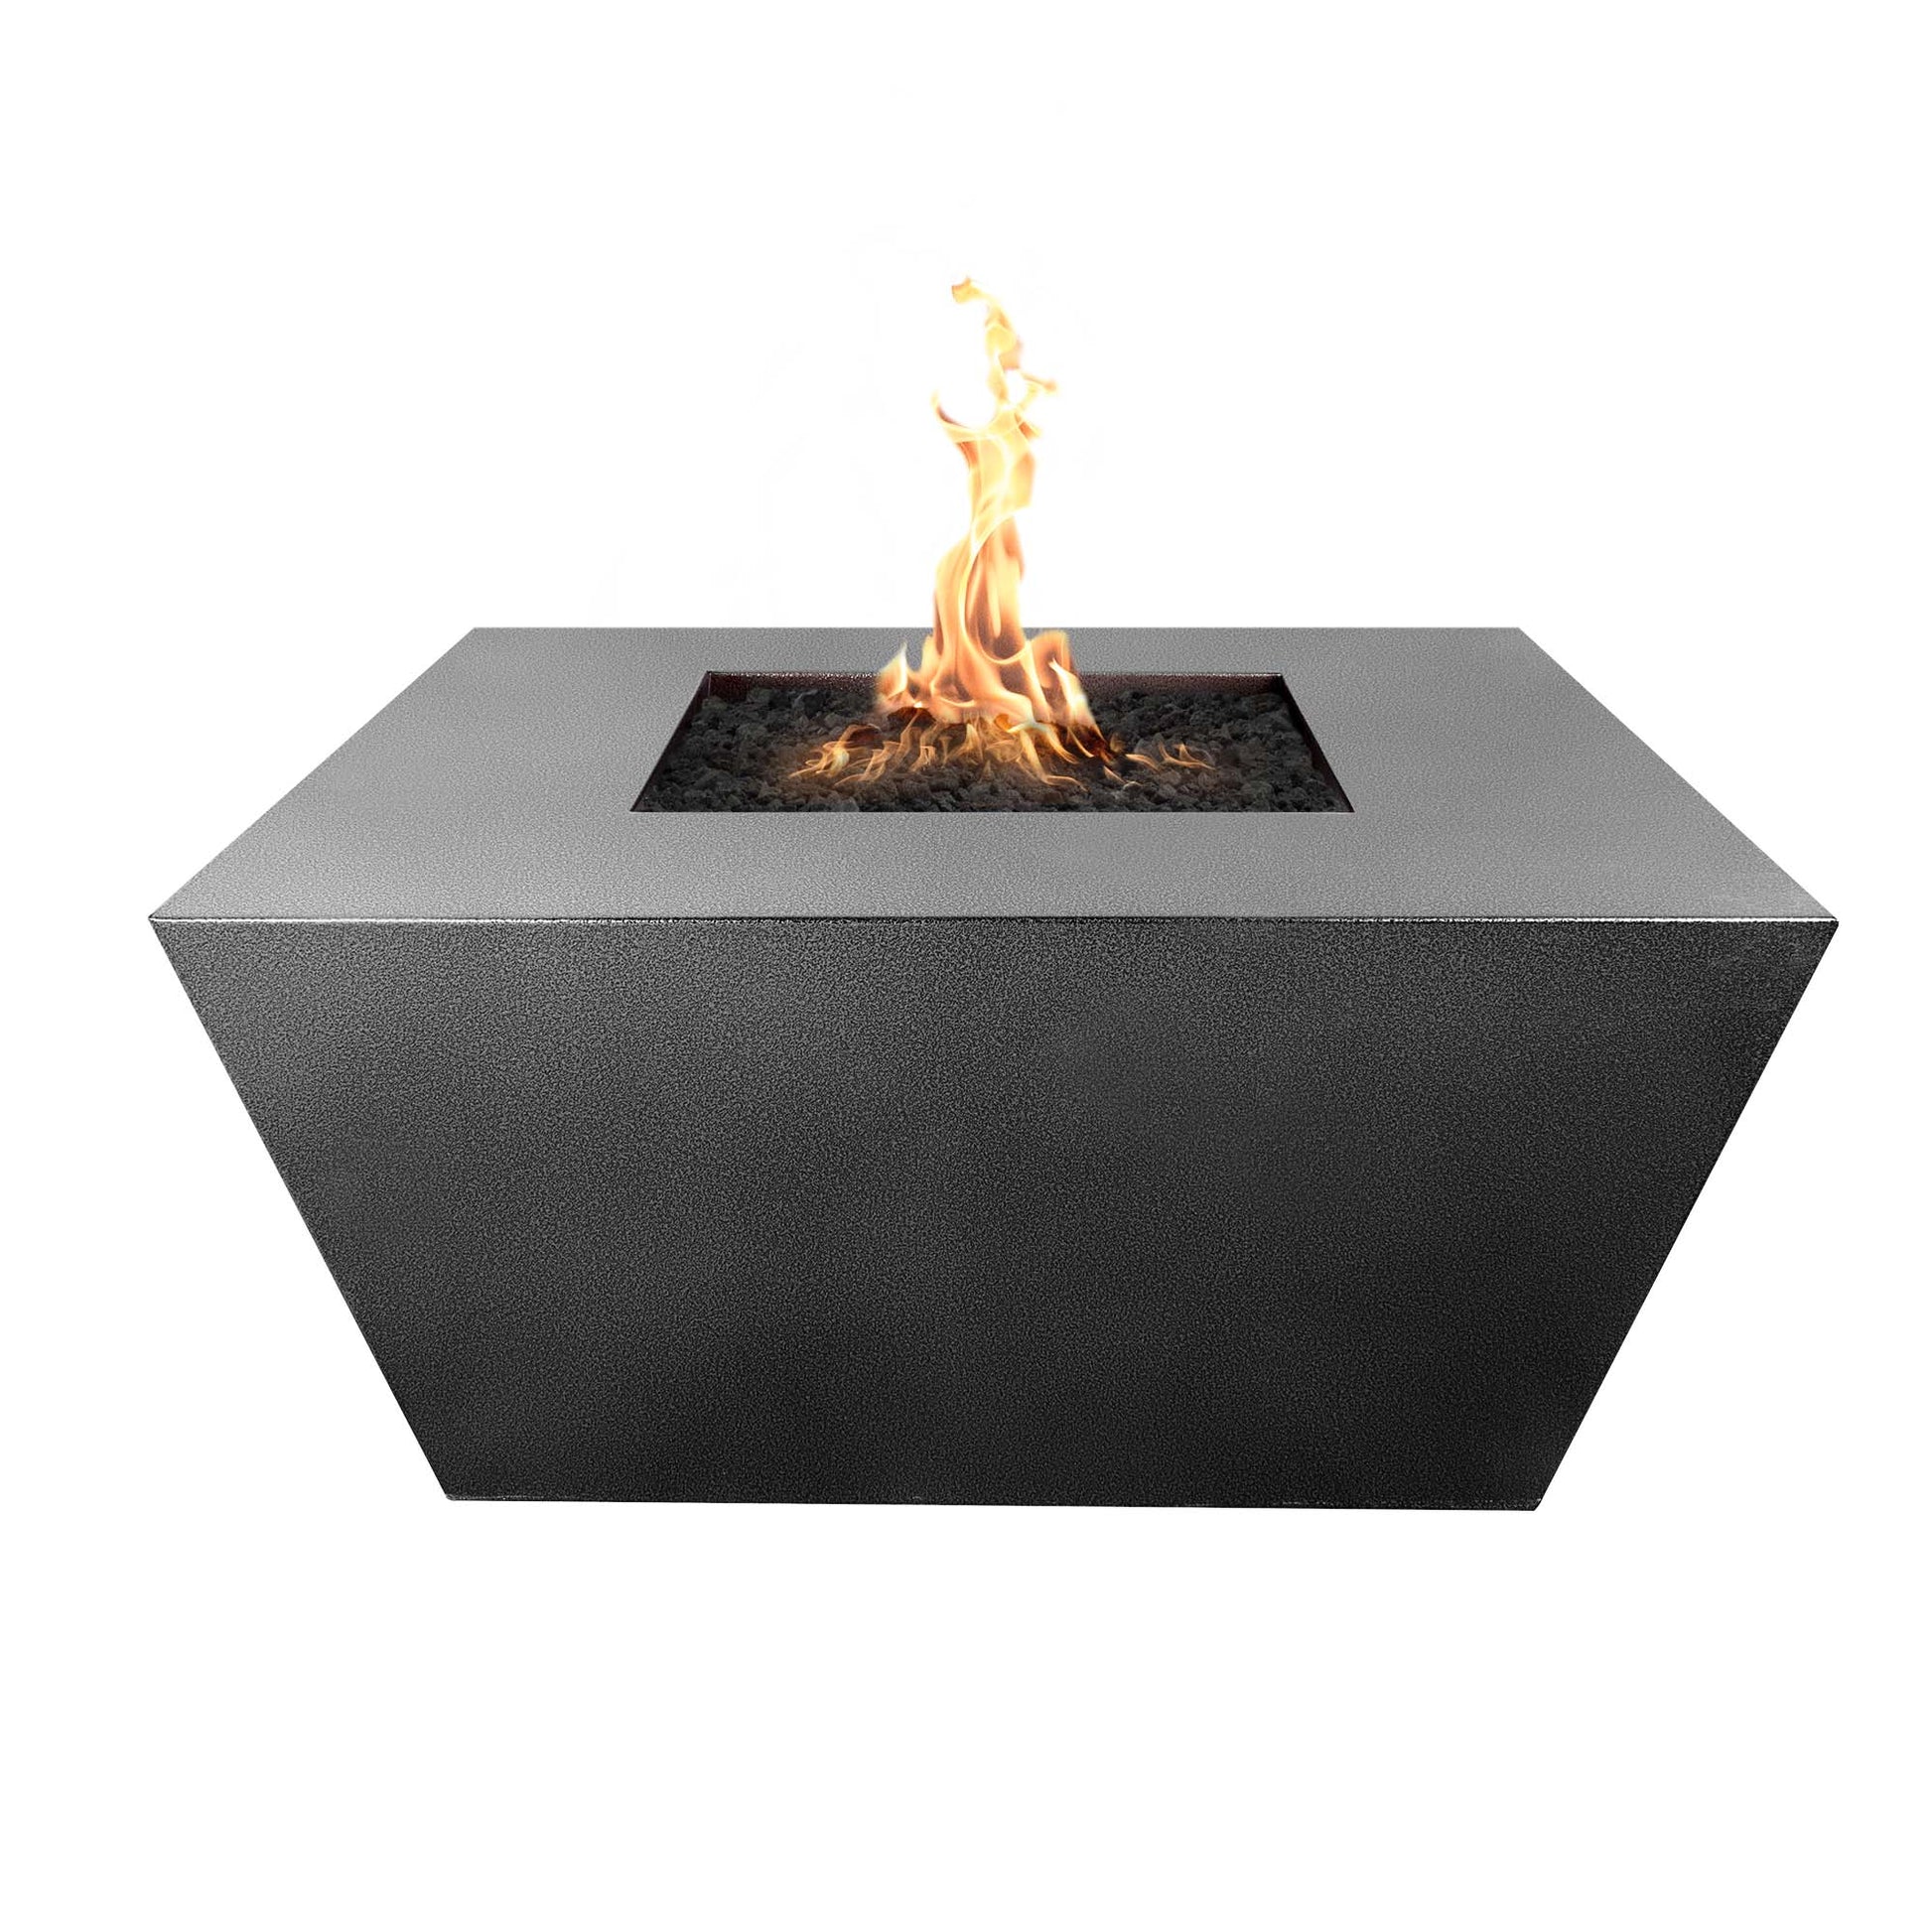 The Outdoor Plus Square Redan 48" Copper Vein Powder Coated Metal Natural Gas Fire Pit with 110V Electronic Ignition